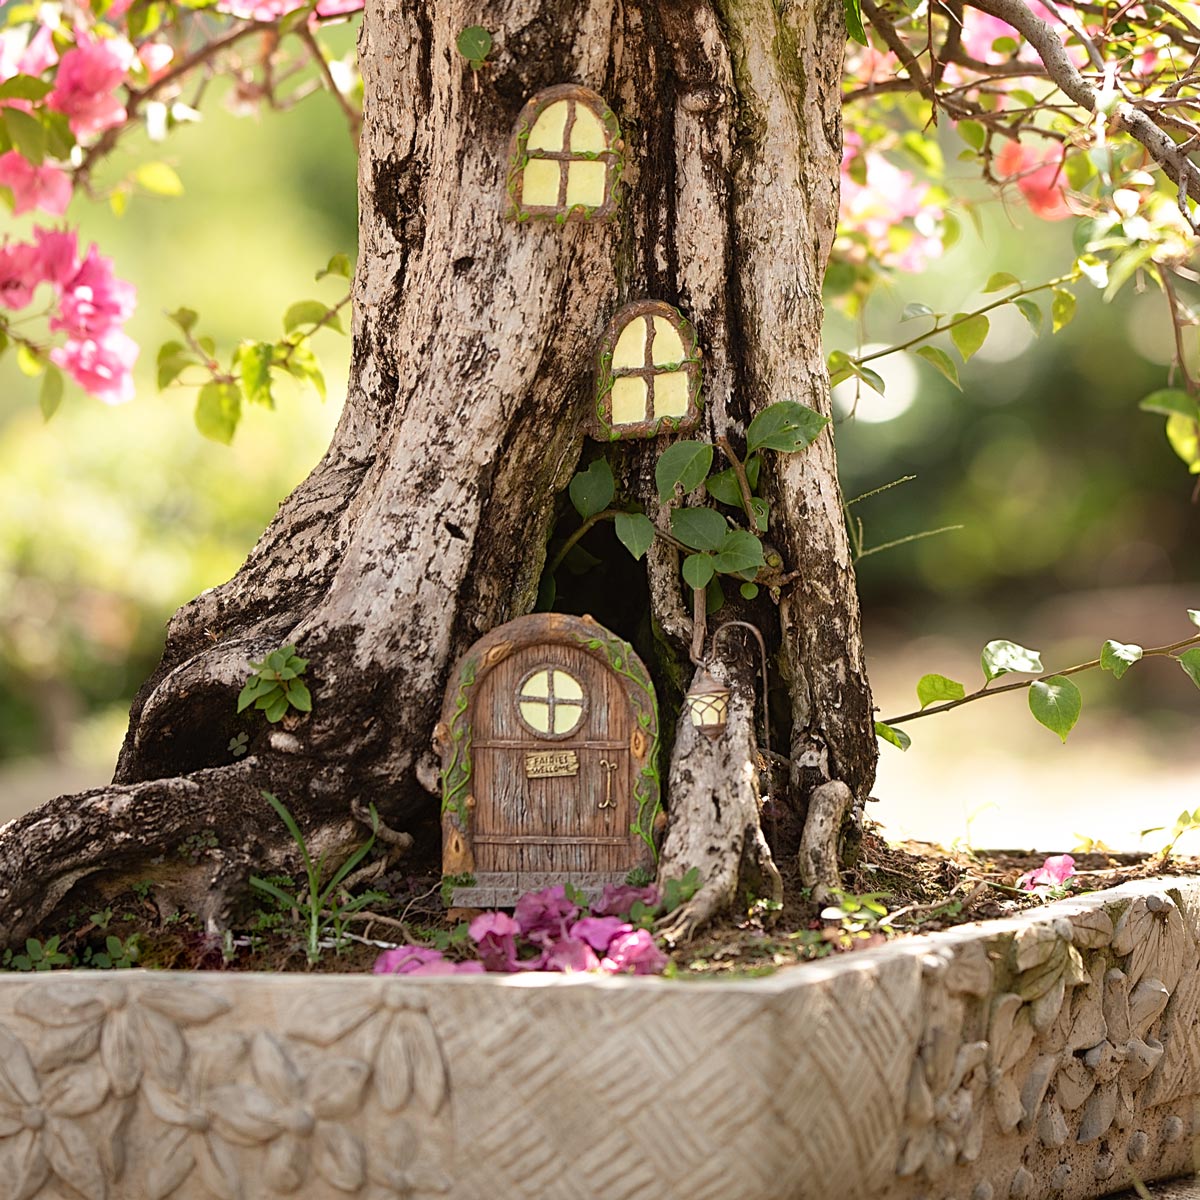 TREE POETRY - Product, Fairy Door and Windows for Trees - Glow in The Dark